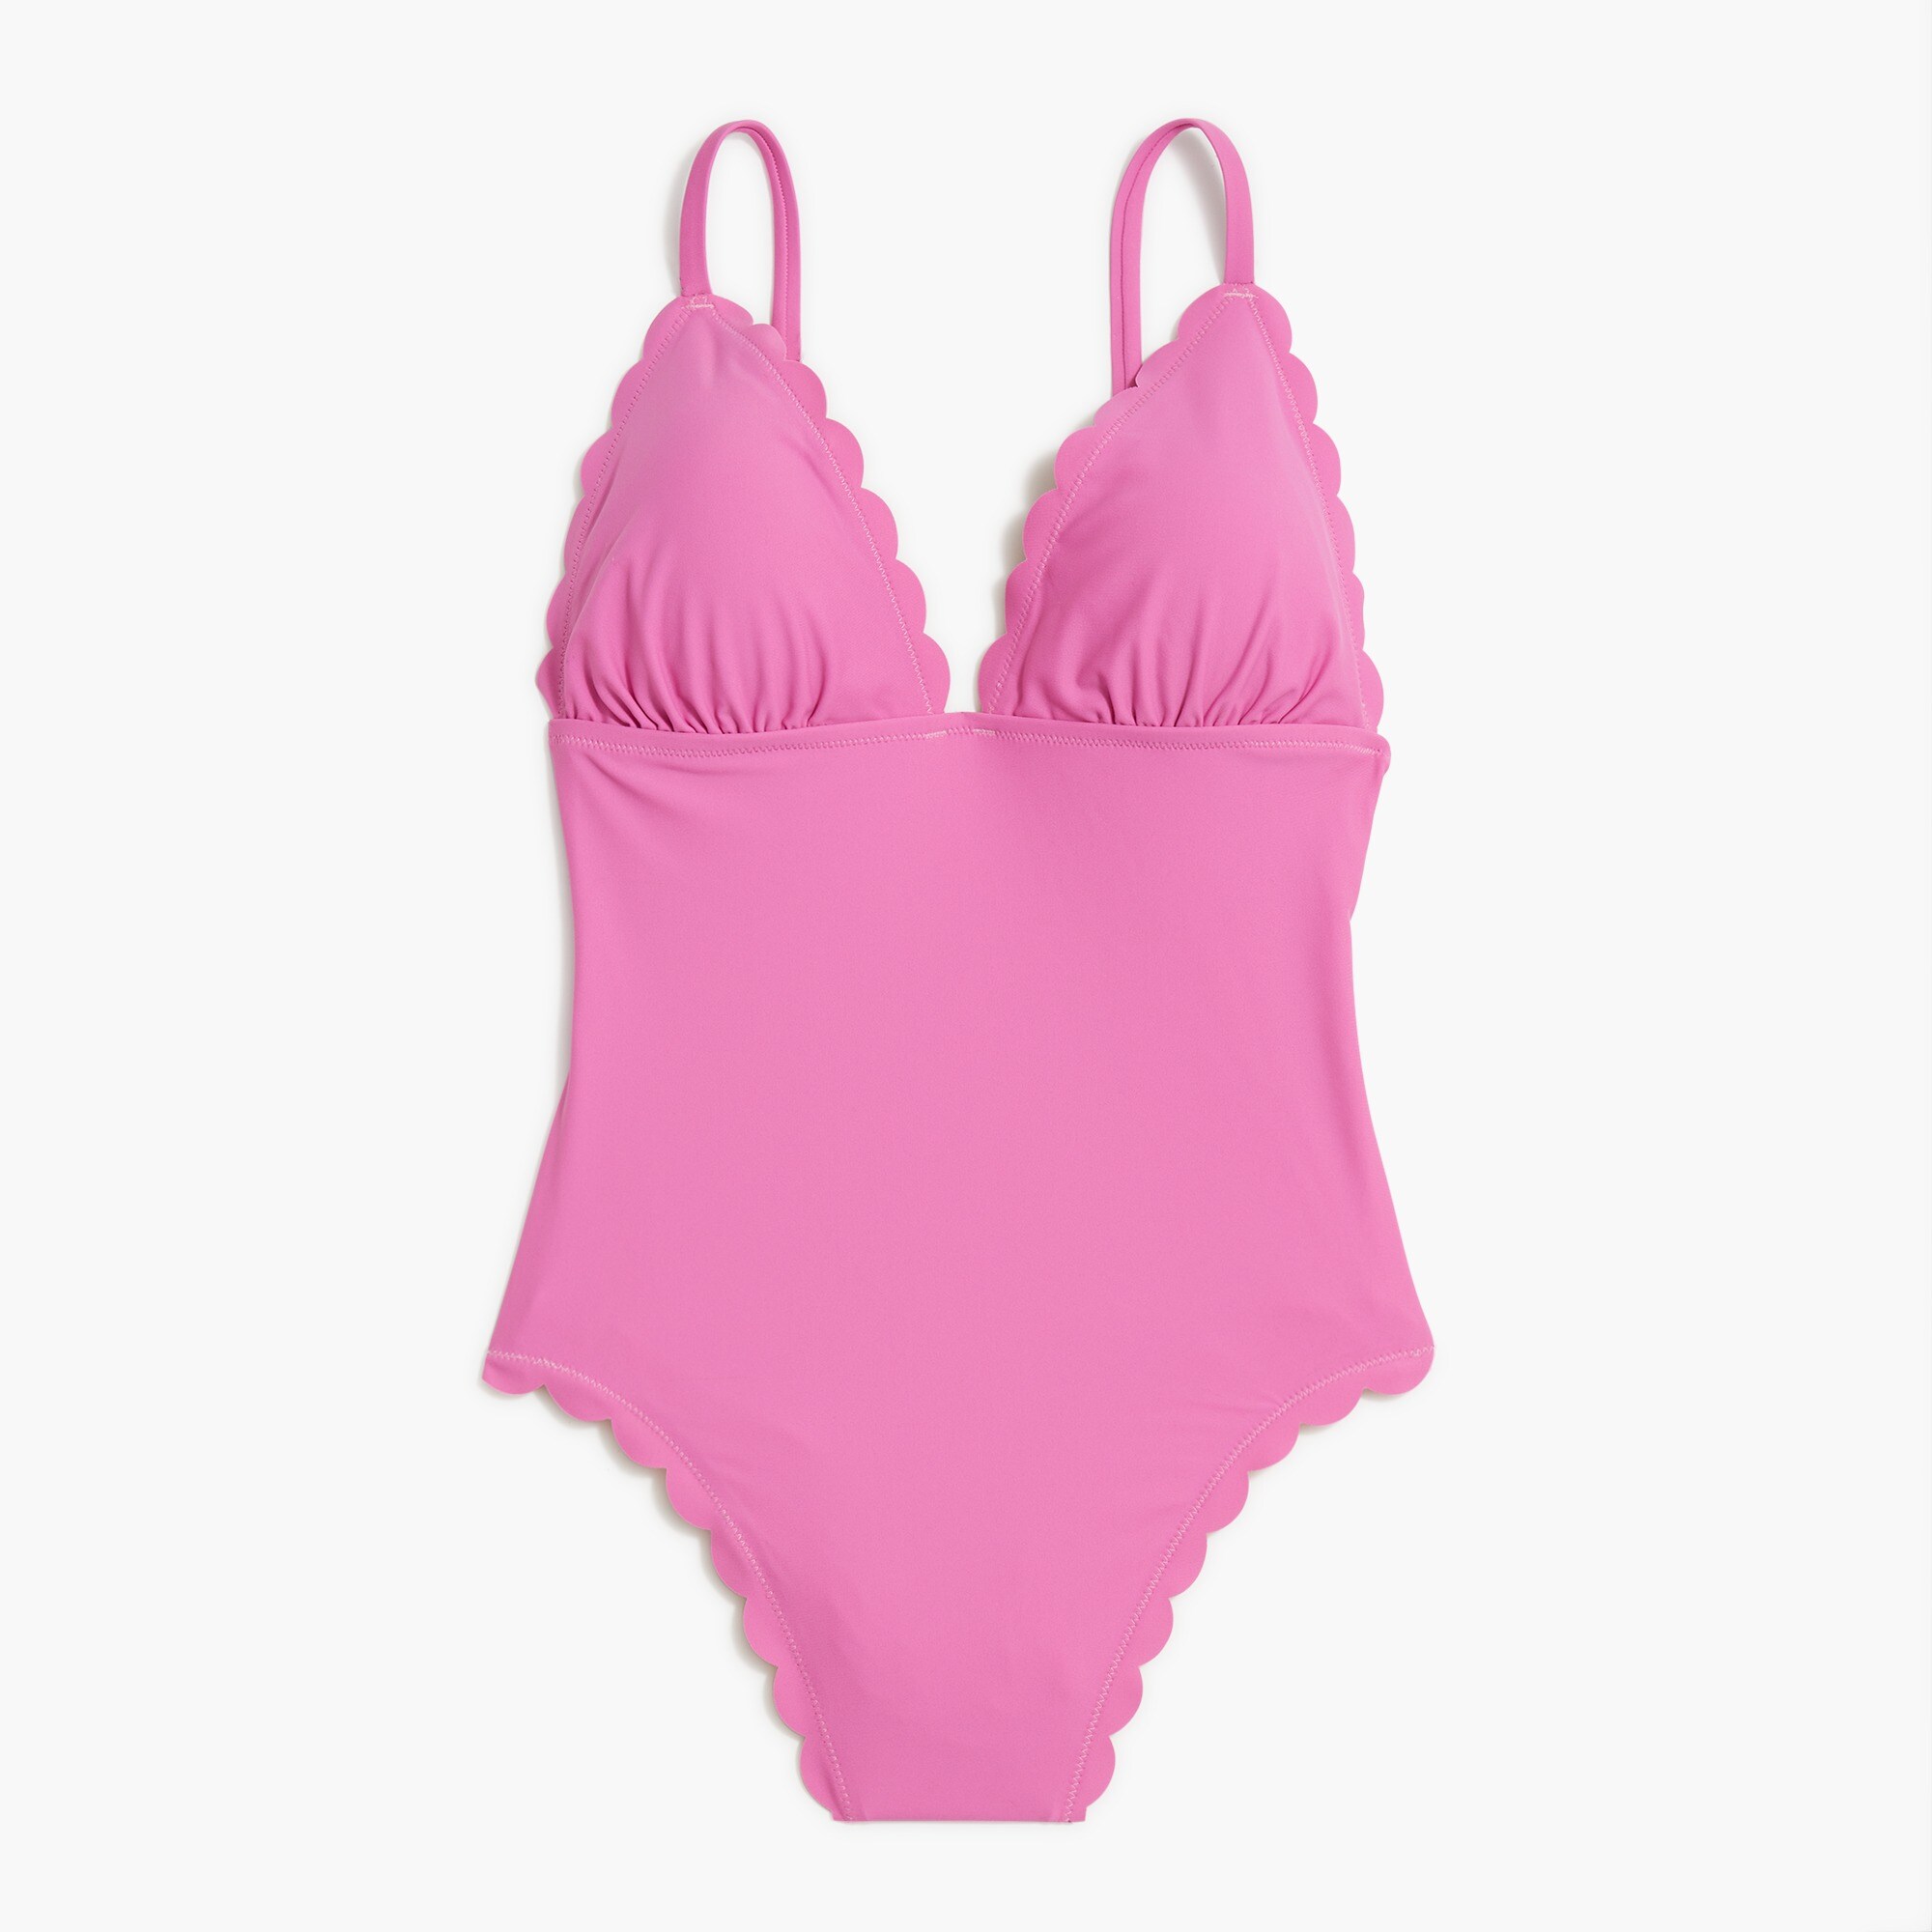  Scalloped one-piece swimsuit